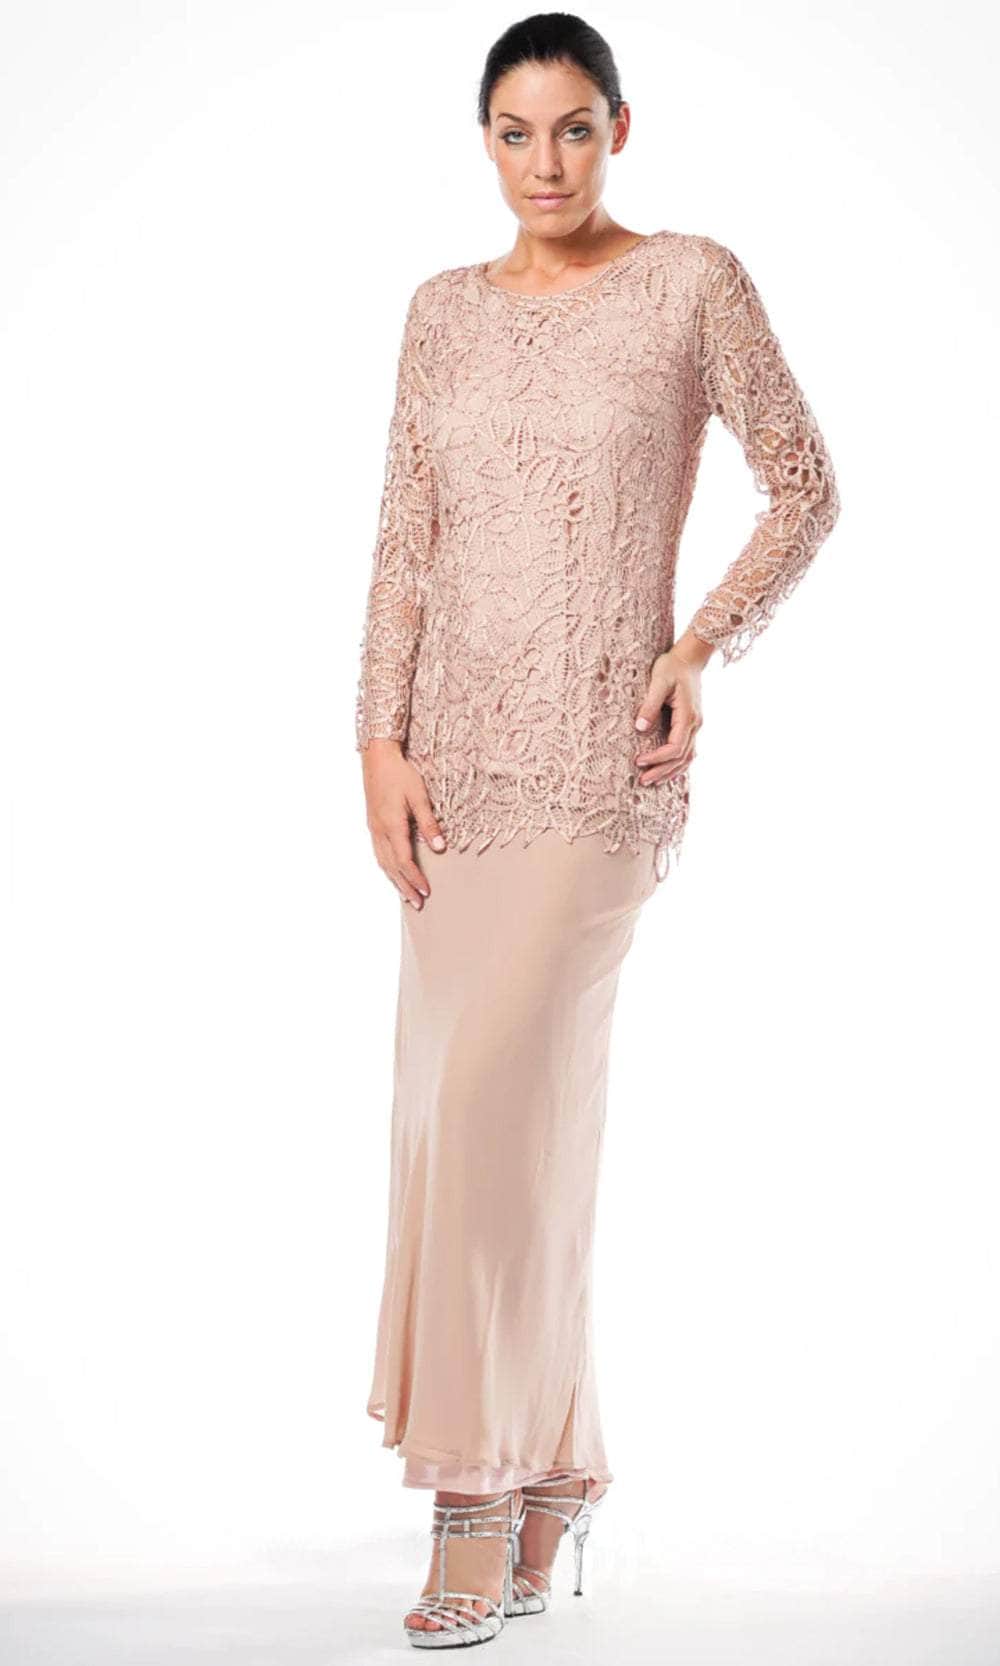 Soulmates C80704 - Crochet Beads Long Sleeve Tunic Skirt Mother Of Bride Dress Mother of the Bride Dresses Dusty Rose / S